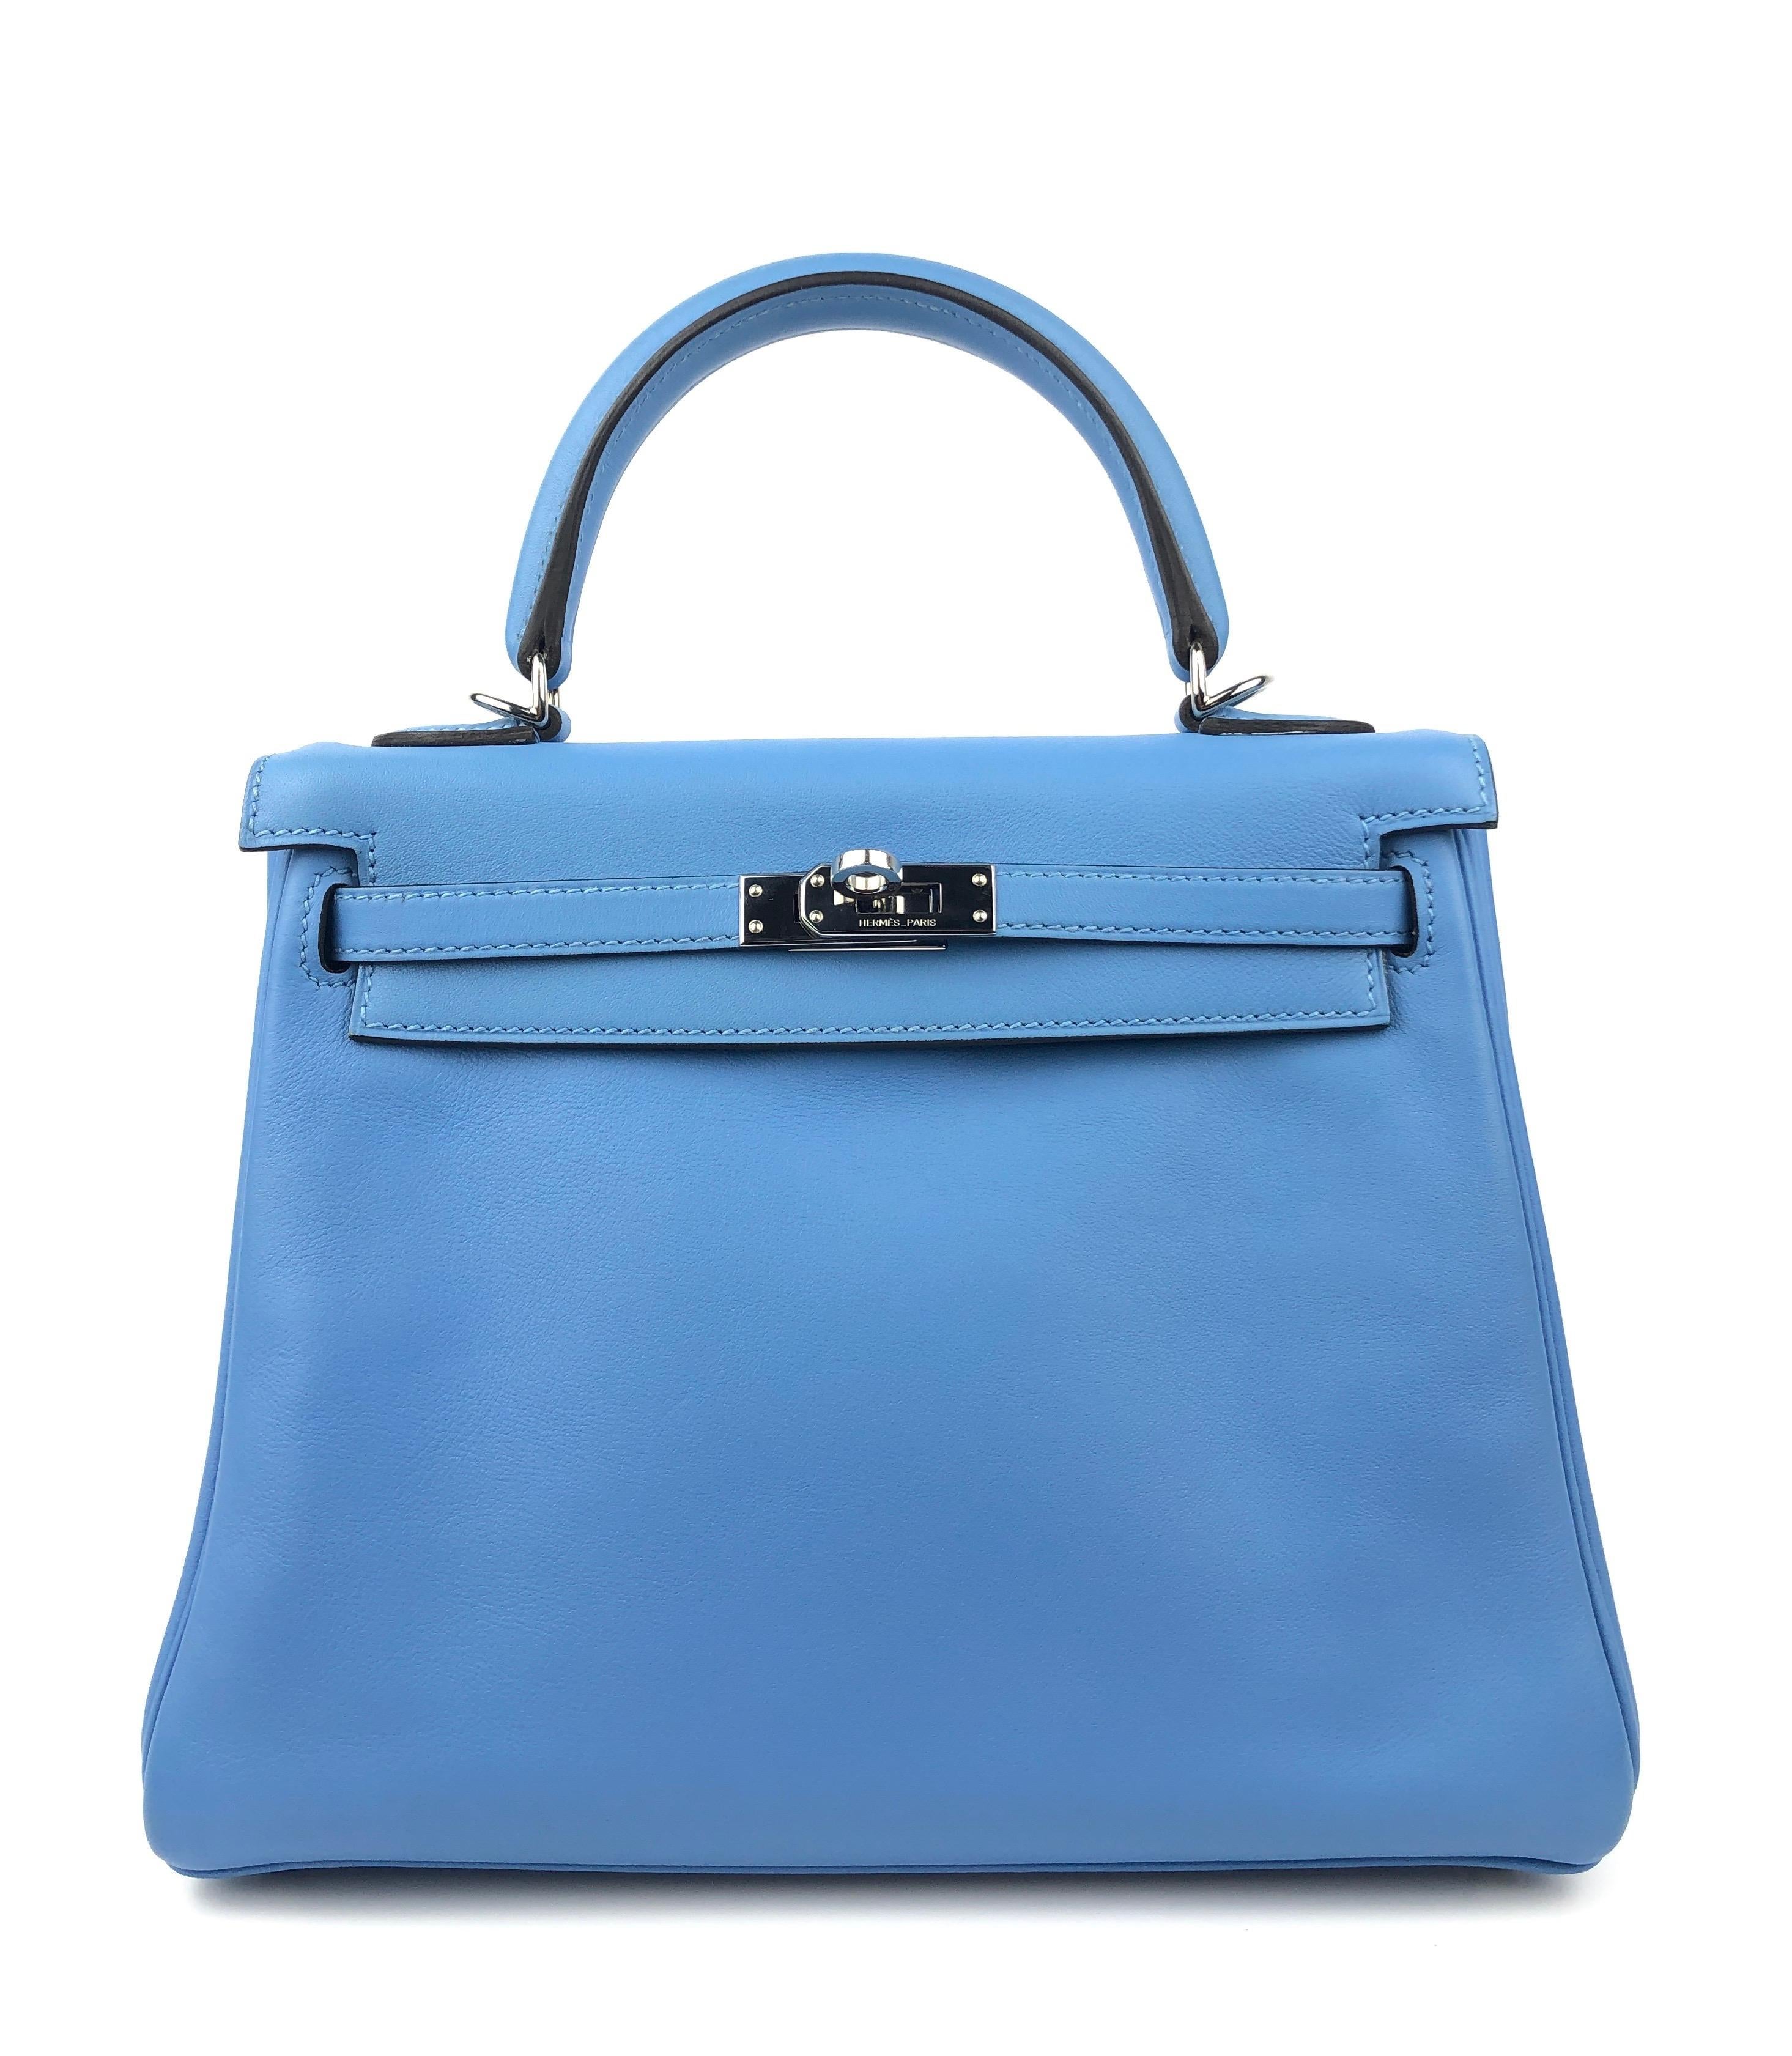 Hermes Kelly 25 Blue Paradise Swift Leather Palladium Hardware. Excellent Pristine Condition. Light hairlines on hardware. 

Shop with Confidence from Lux Addicts. Authenticity Guaranteed! 